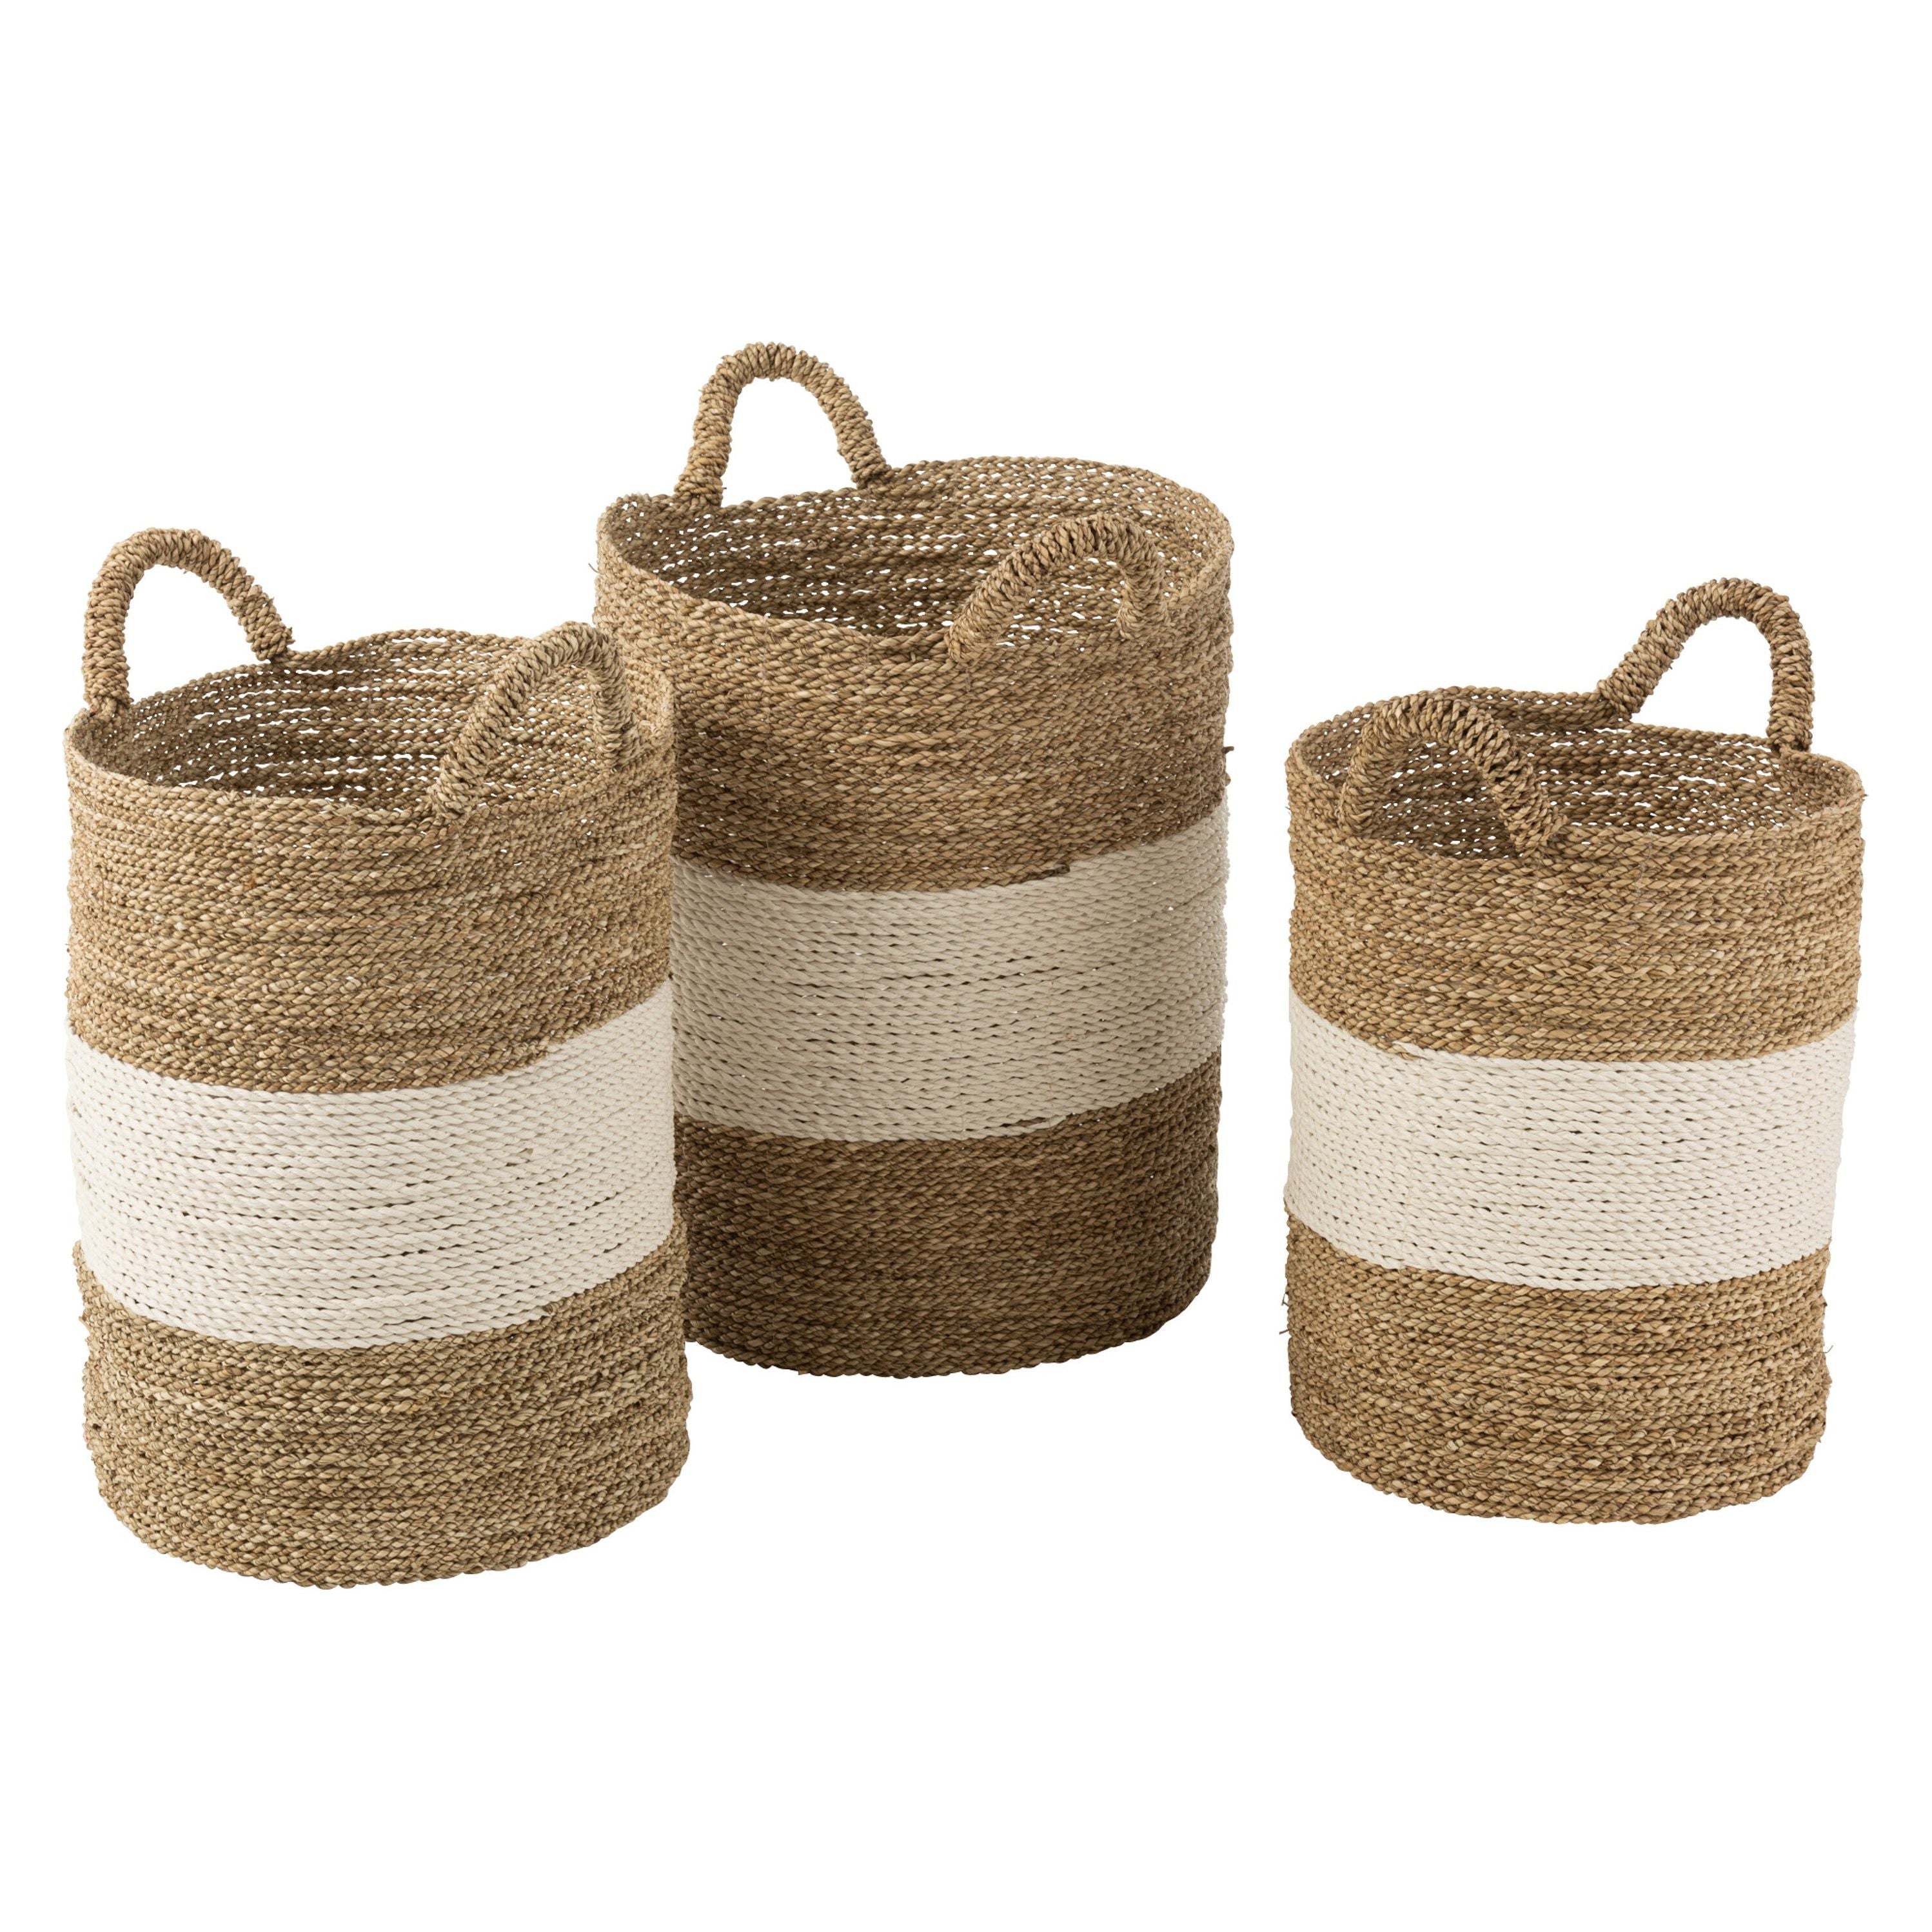 Baskets Seagrass White/natural